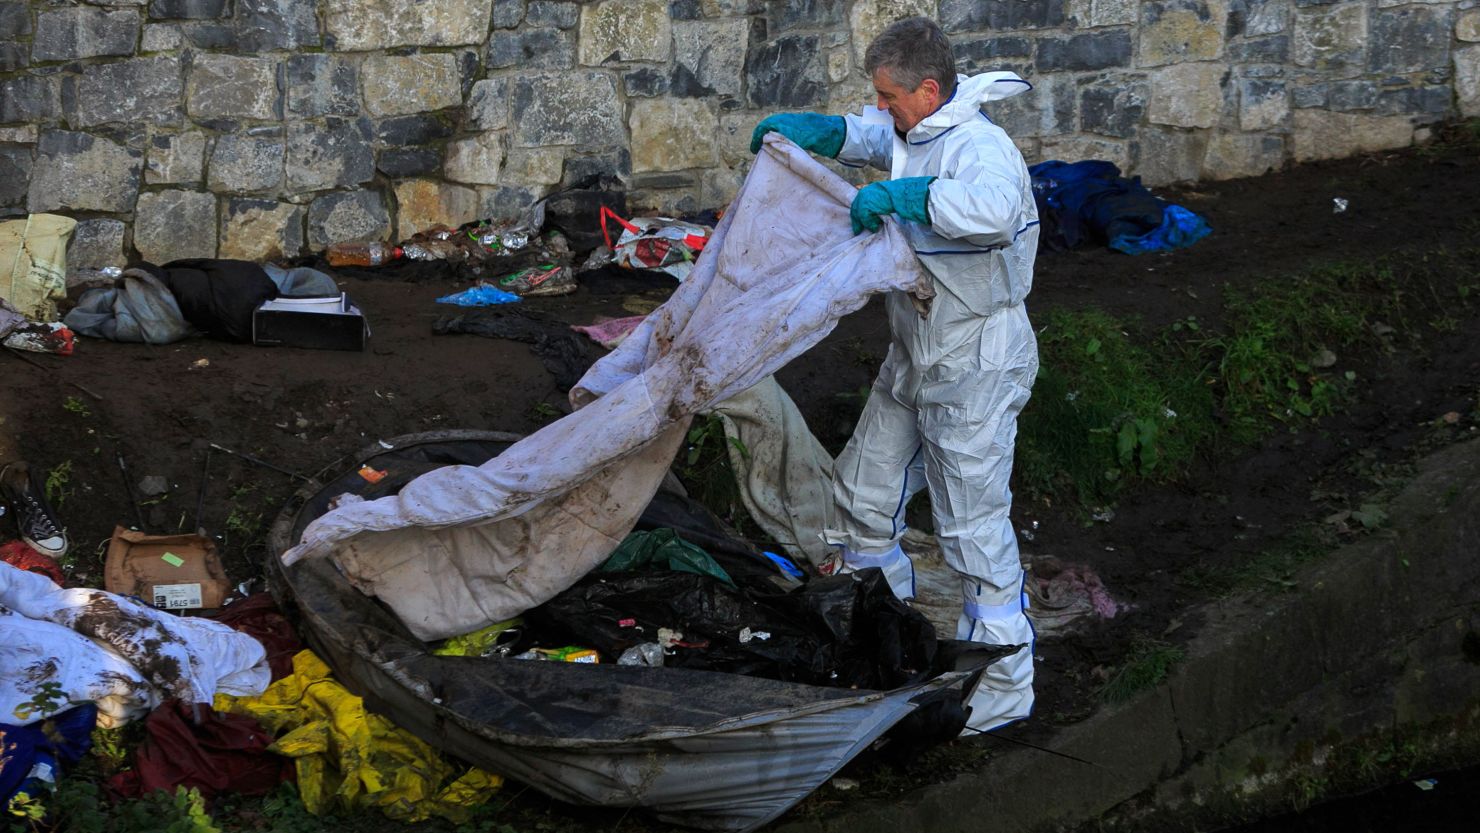 Municipal workers have been removing homeless people's tents along the Grand Canal in Dublin's city center.